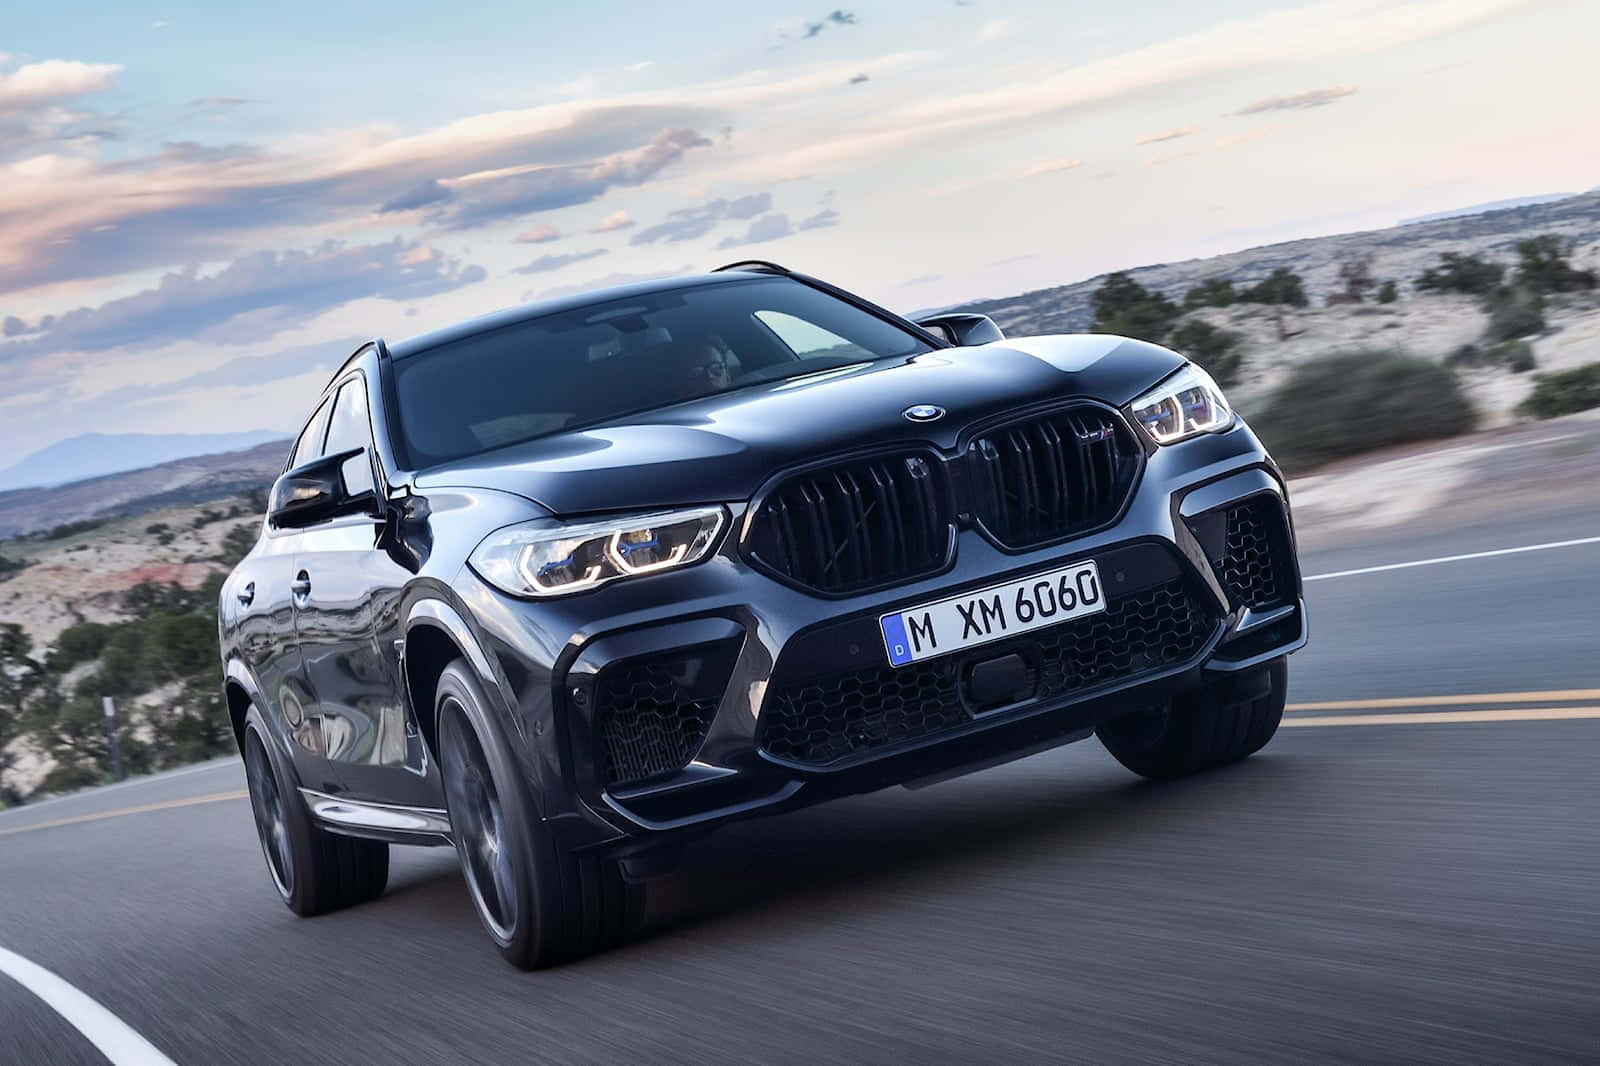 "Designed to empower your drive - The BMW X6 M"